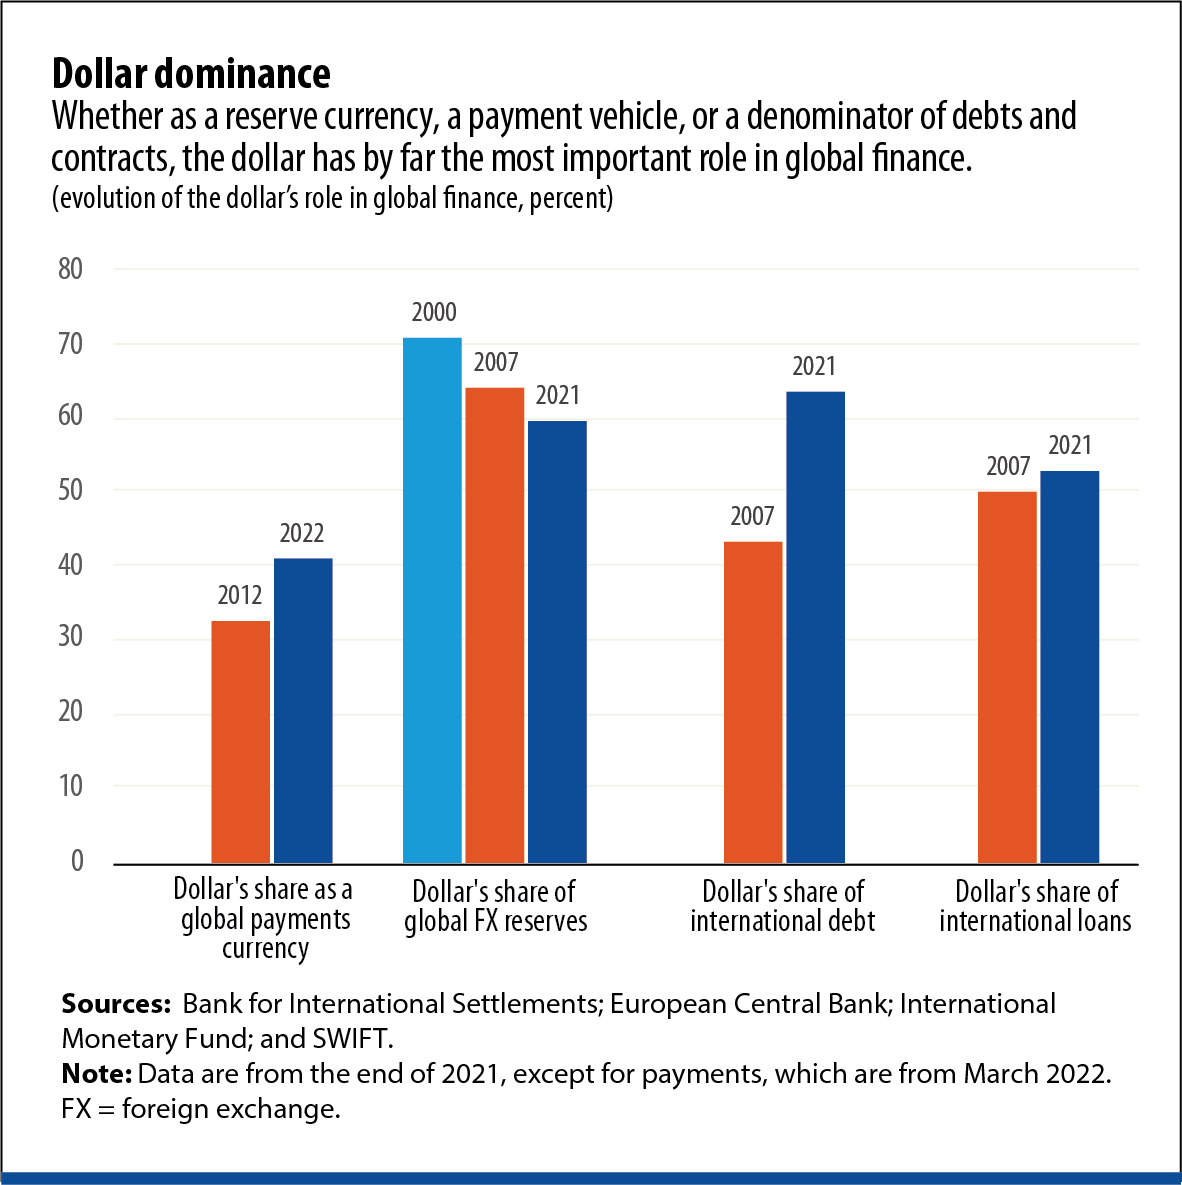 Dollar dominance Whether as a reserve currency, a payment vehicle, or a denominator of debts and  contracts, the dollar has by far the most important role in global nance. (evolution of the dollar’s role in global nance, percent)